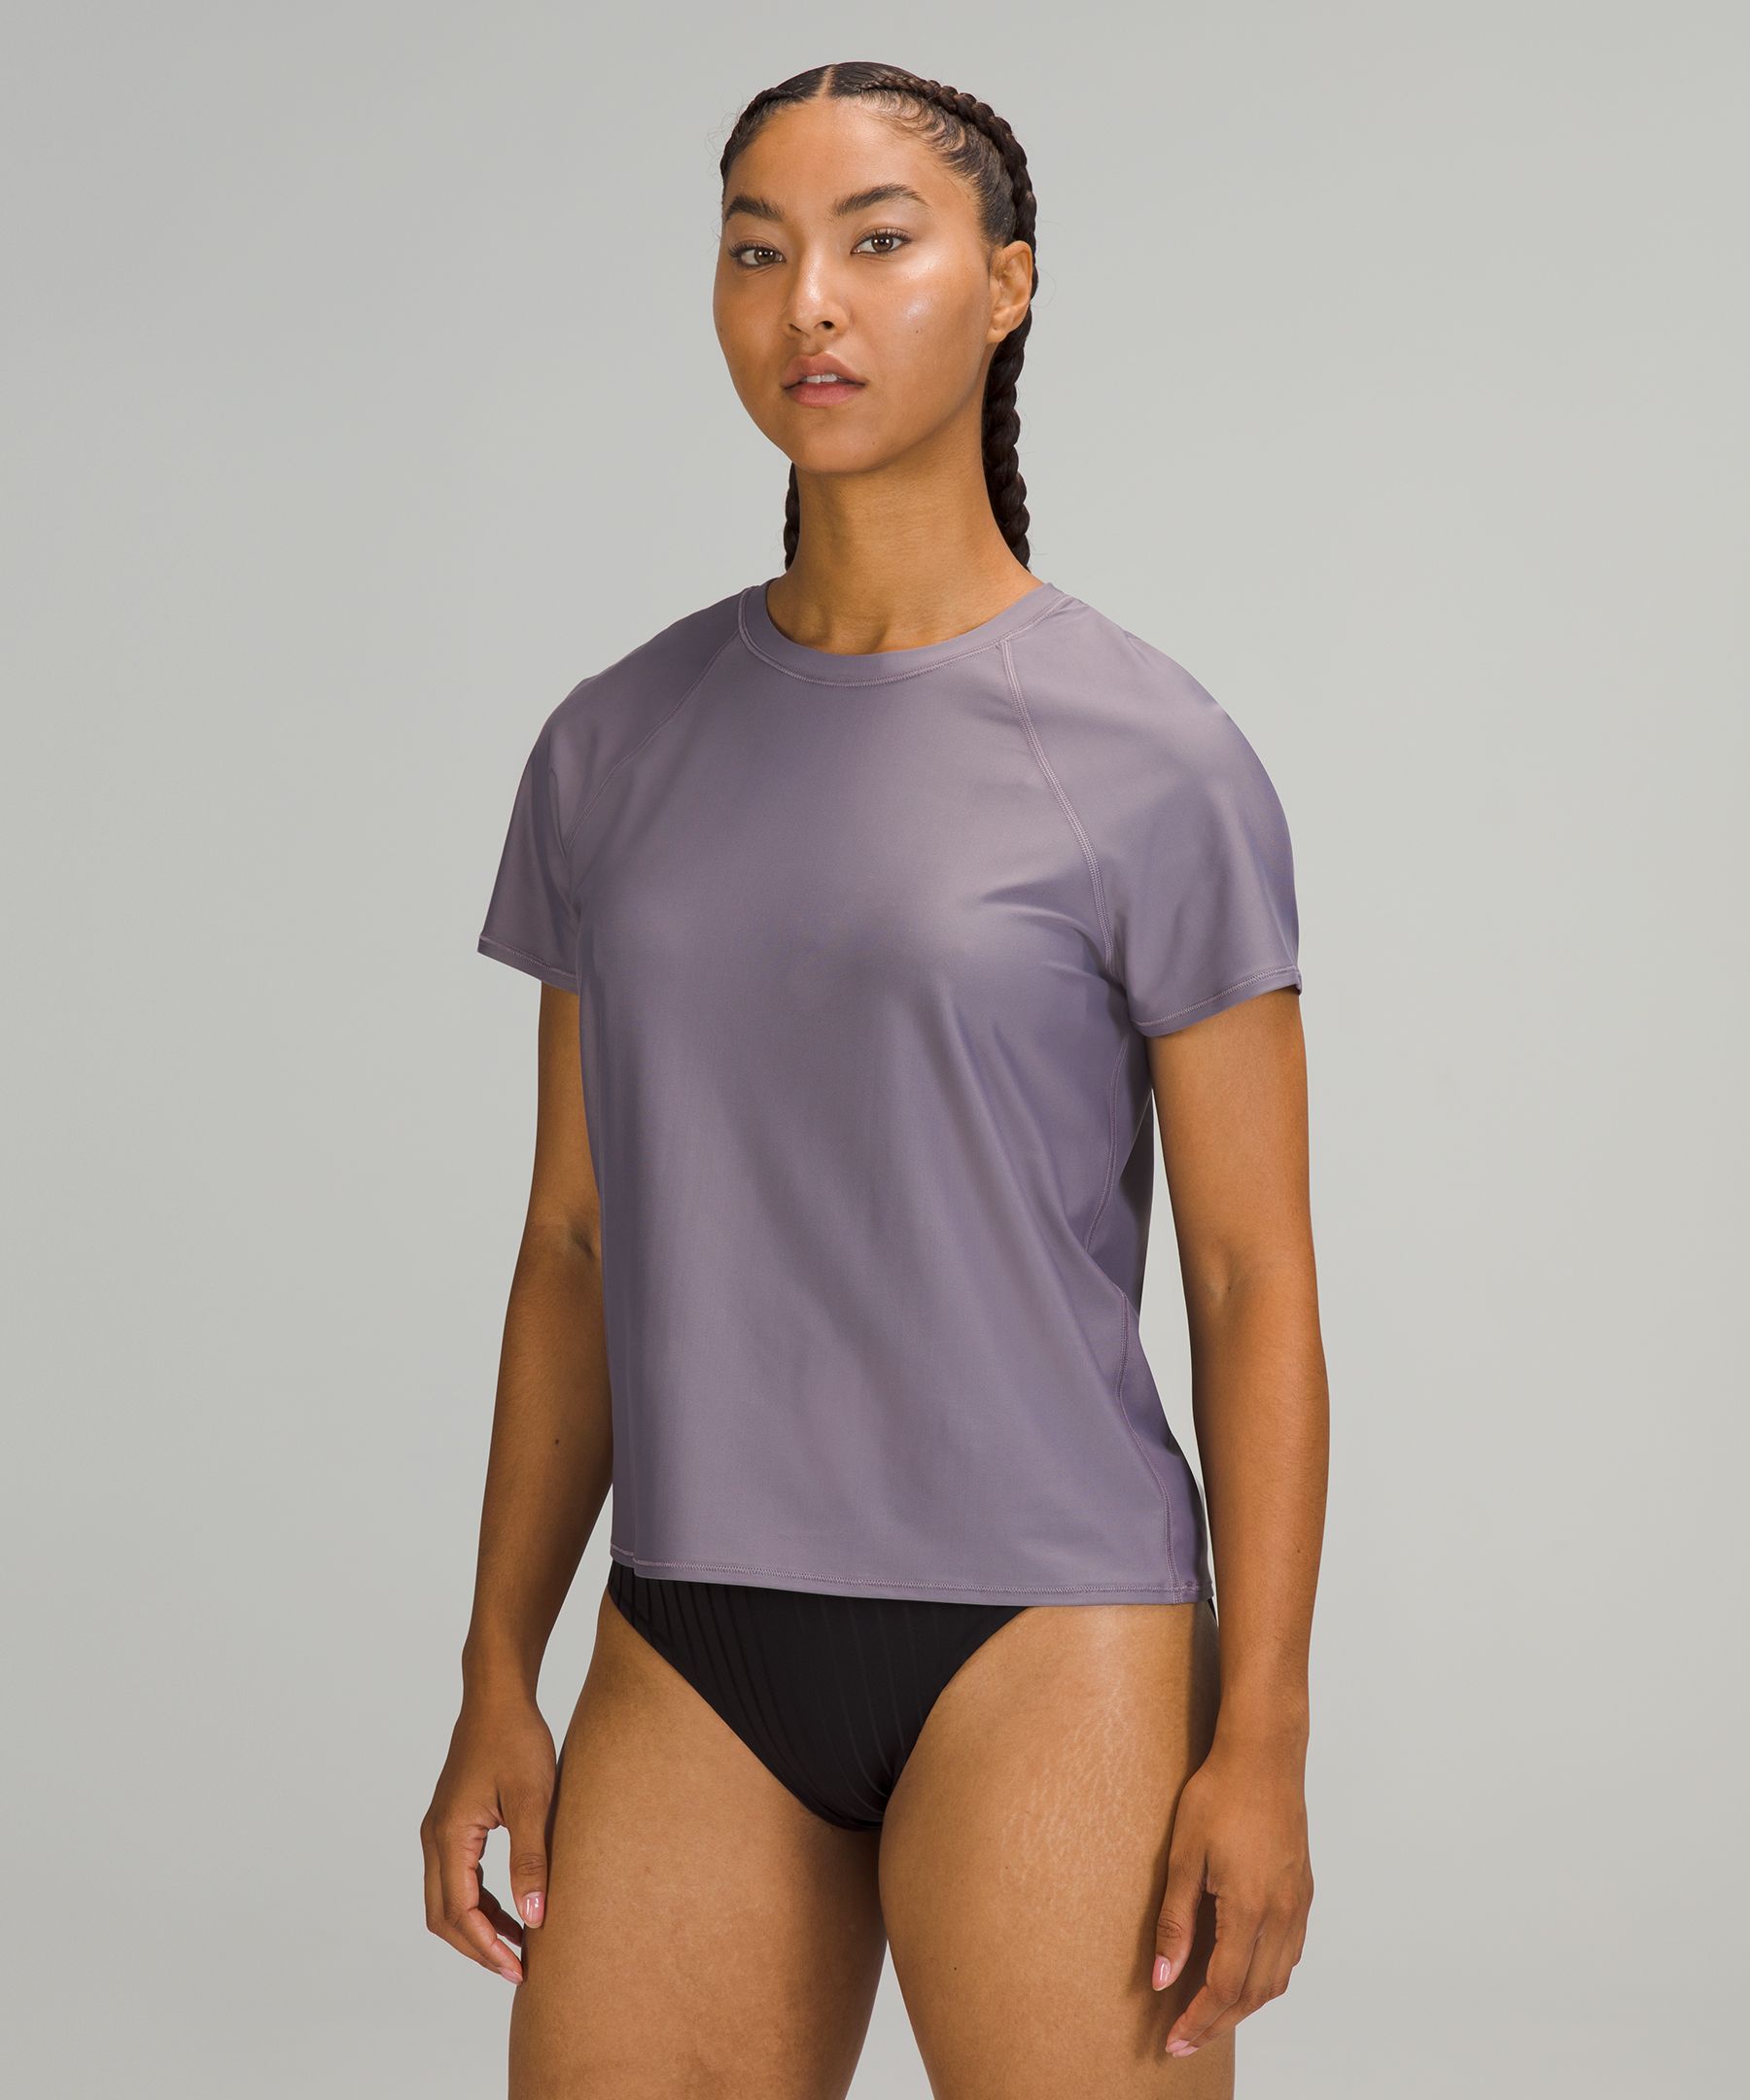 Waterside Relaxed UV Protection Short-Sleeve Shirt, Women's Swimsuits